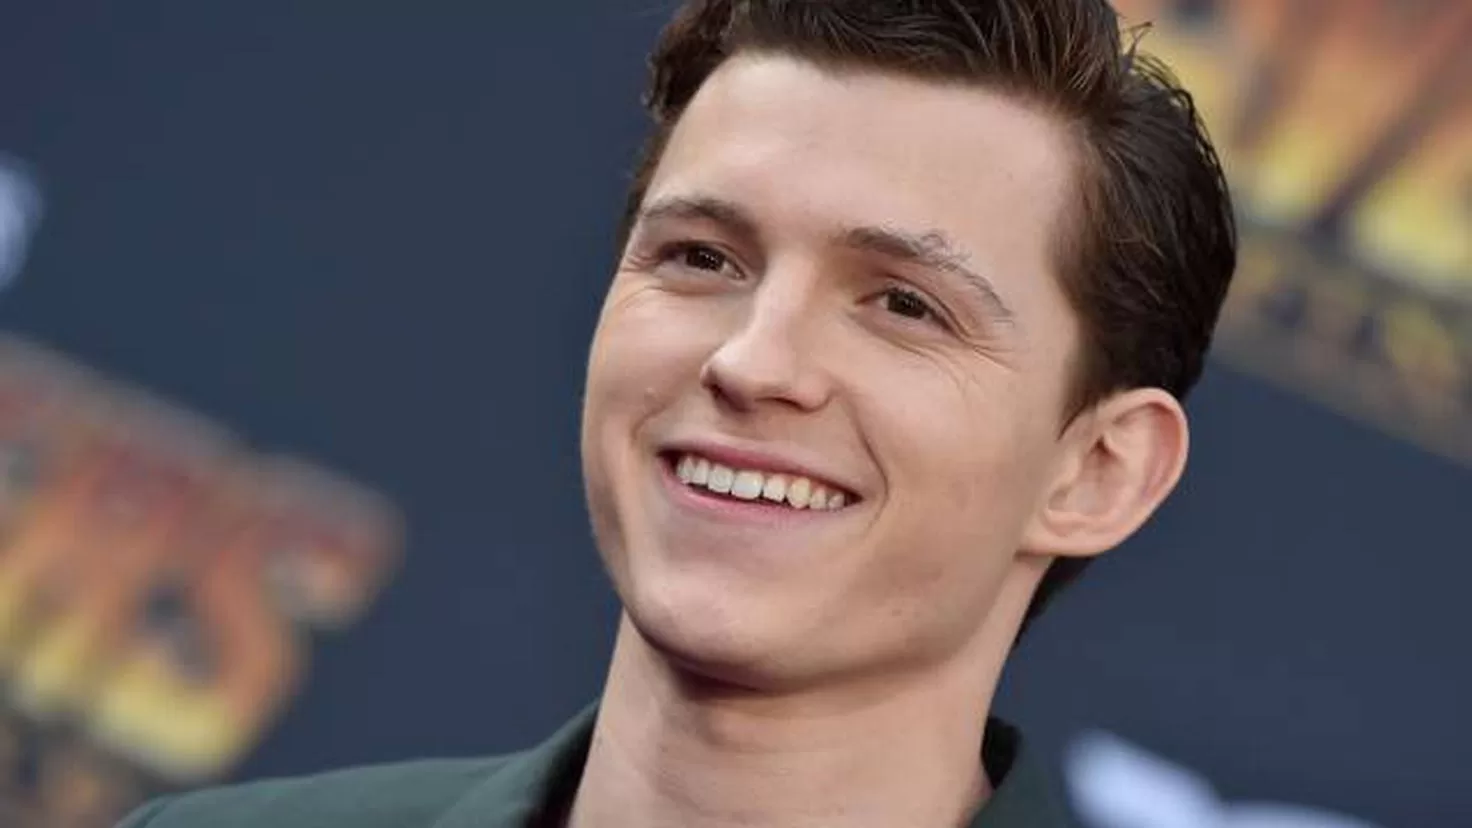 Tom Holland confesses that he has not paid his water bill for five years: I thought it was free
